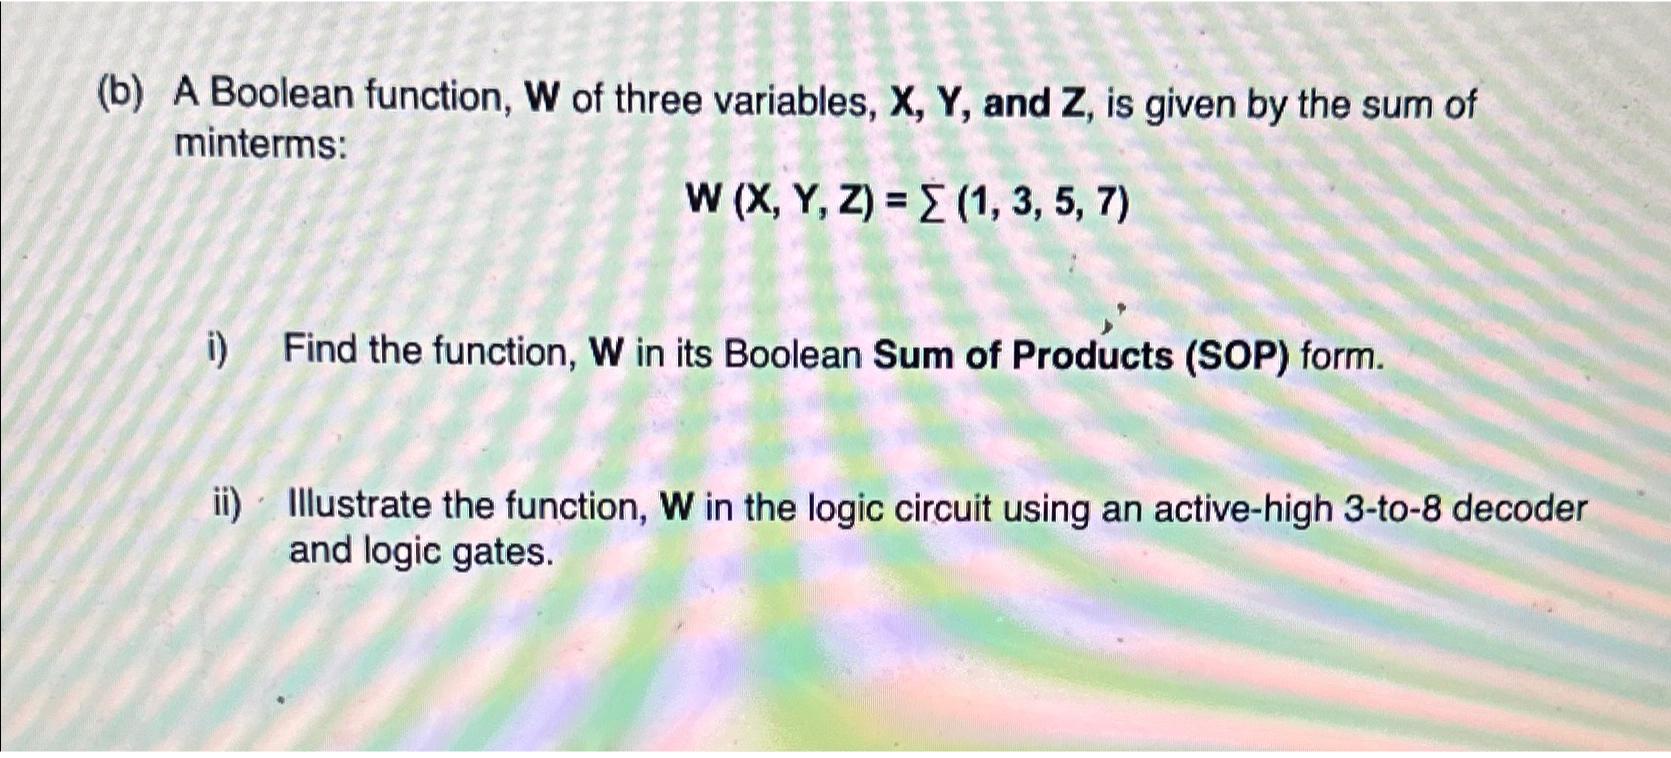 (b) A Boolean function, W of three variables, X, Y, and Z, is given by the sum of minterms: W (X, Y, Z) = (1,